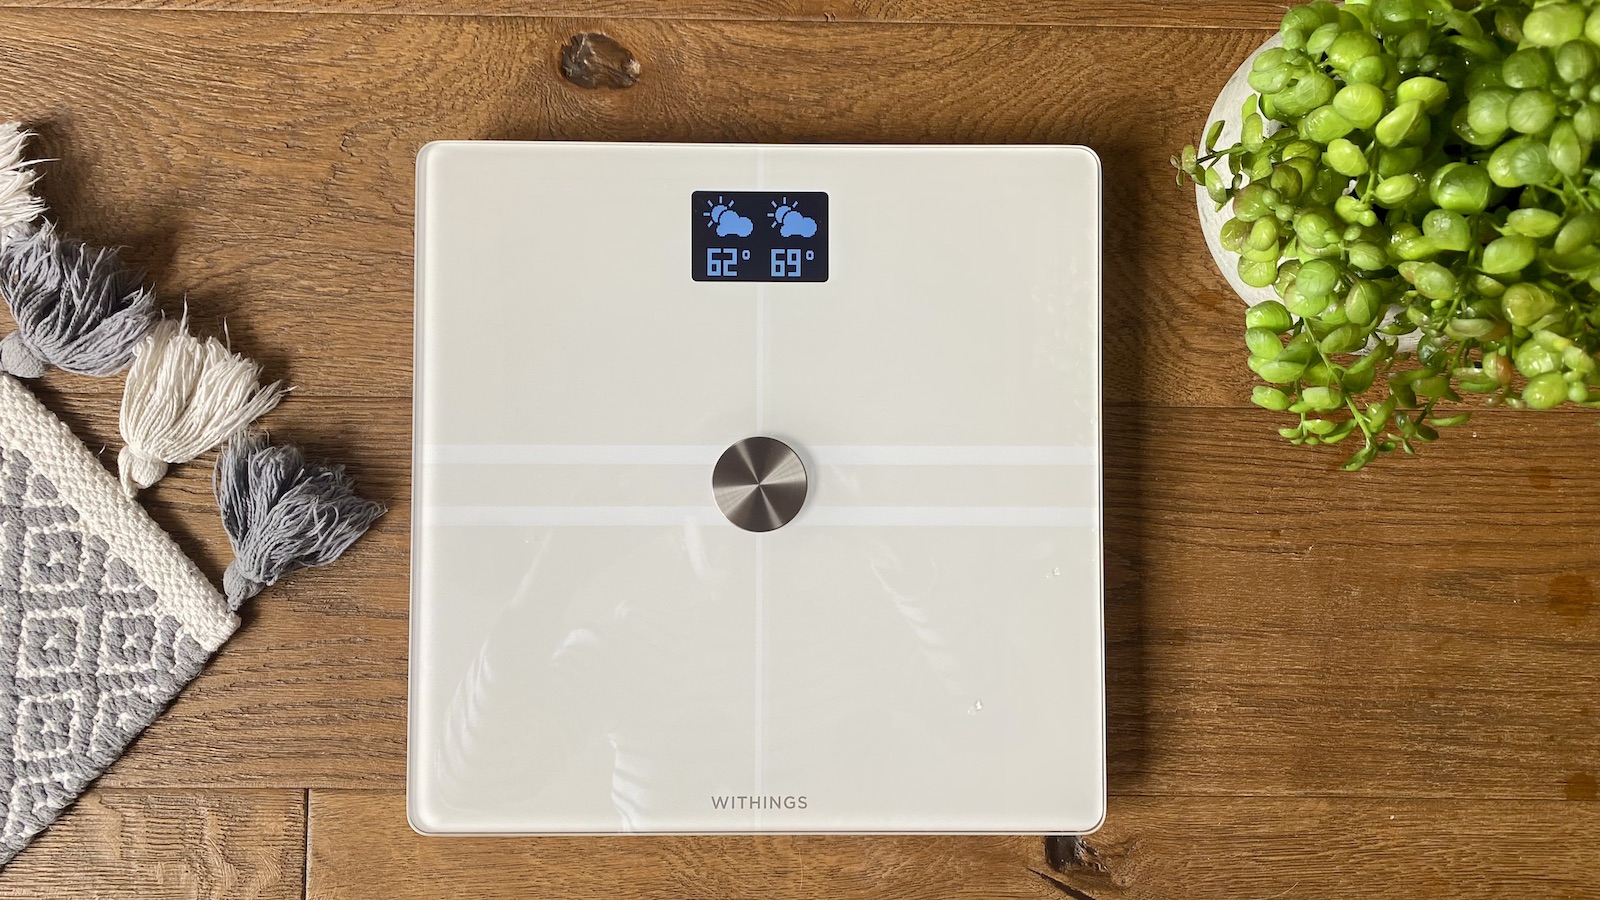  Withings Body Comp -- Best smart scale